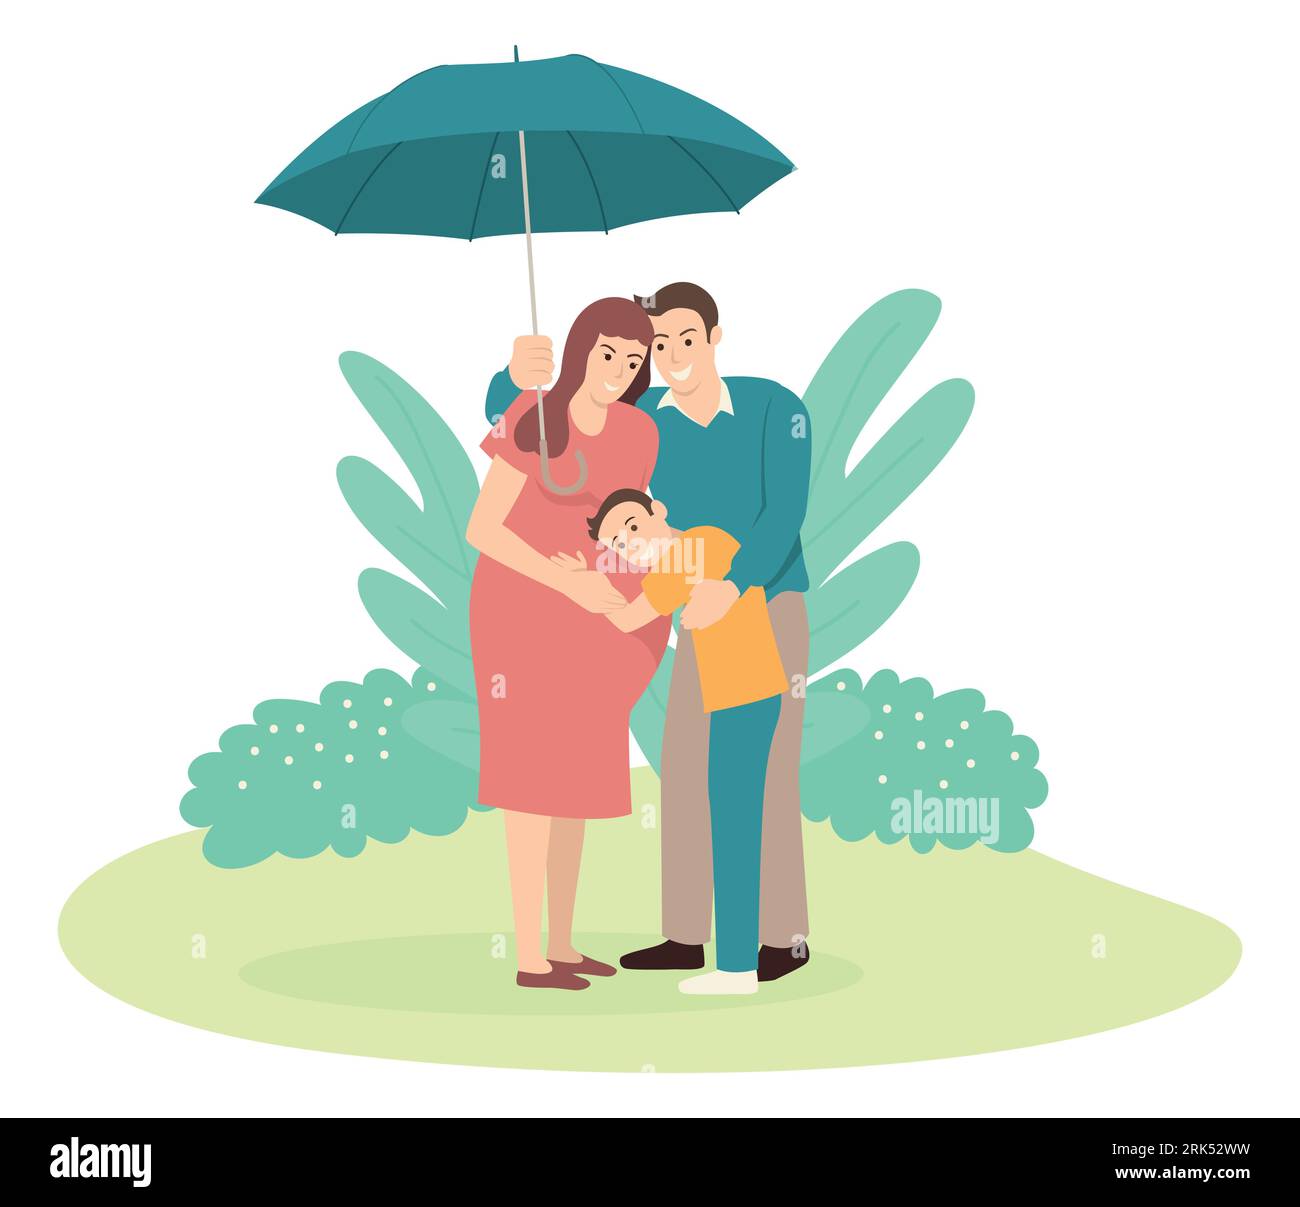 Cartoon illustration of a father holding an umbrella for his family. Family security, protection, responsibility, insurance concept Stock Vector